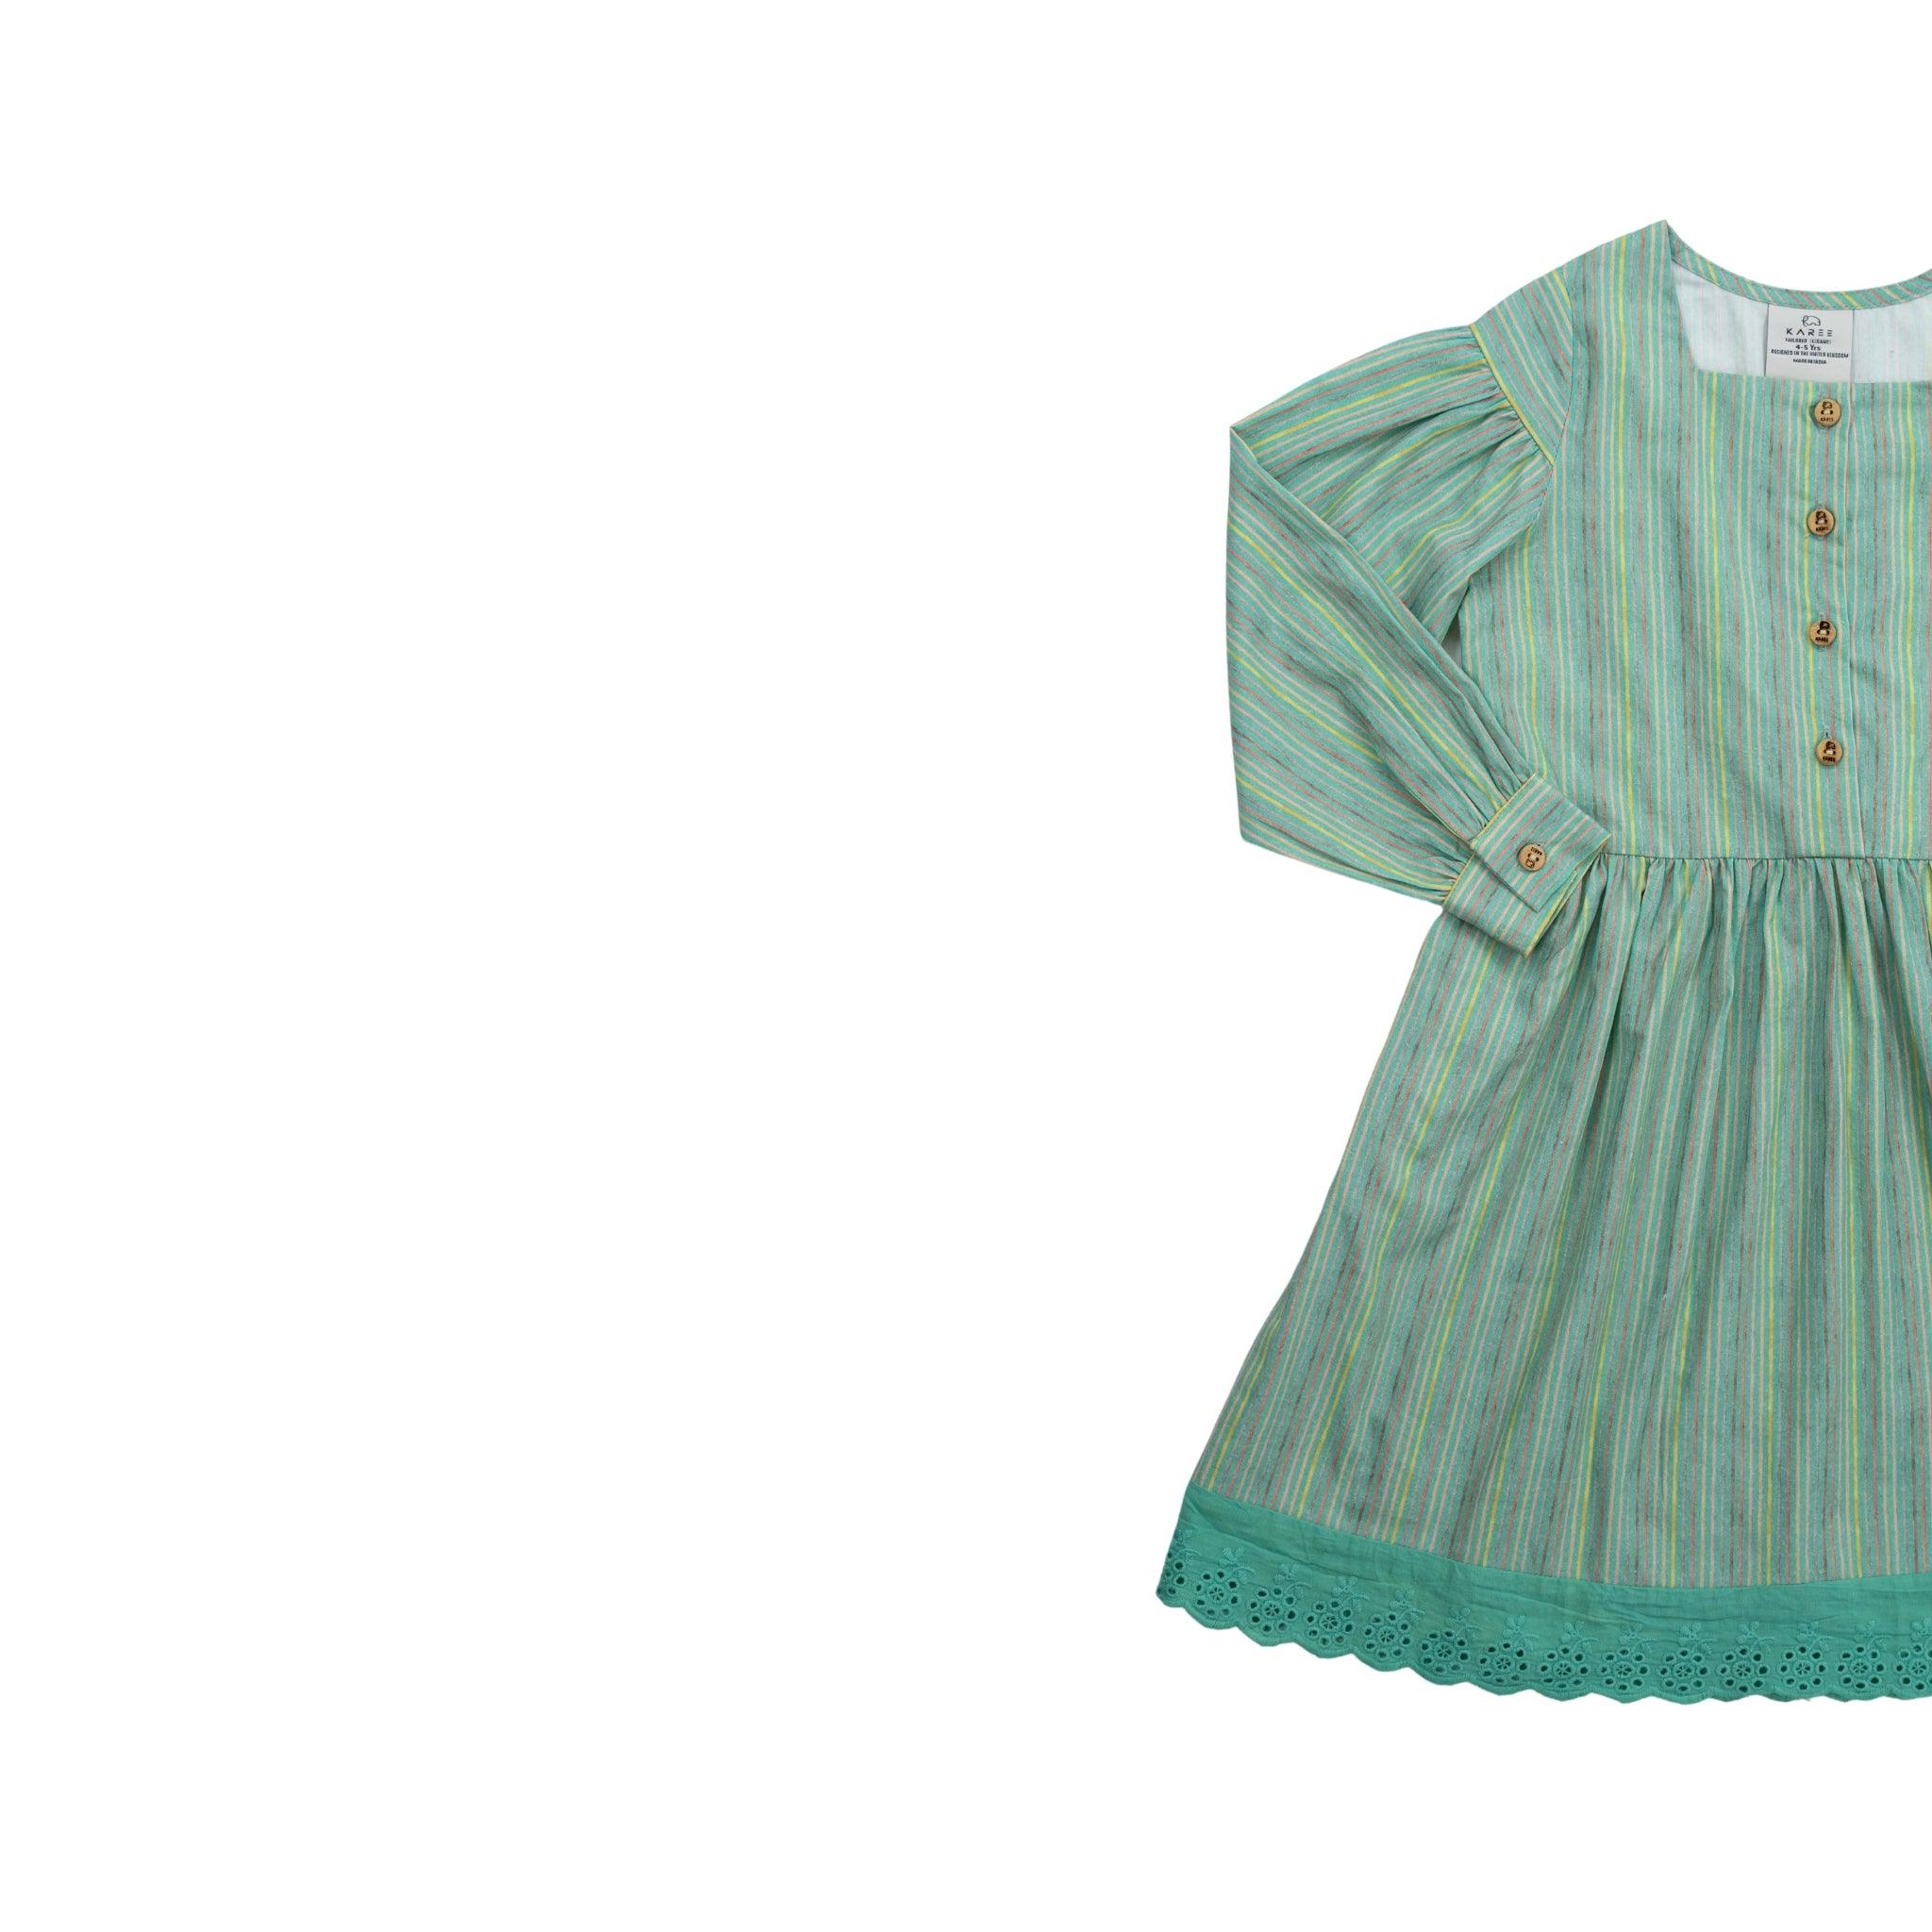 A Karee green and white striped toddler's dress with long puff sleeves and teal lace trim, displayed on a plain white background.